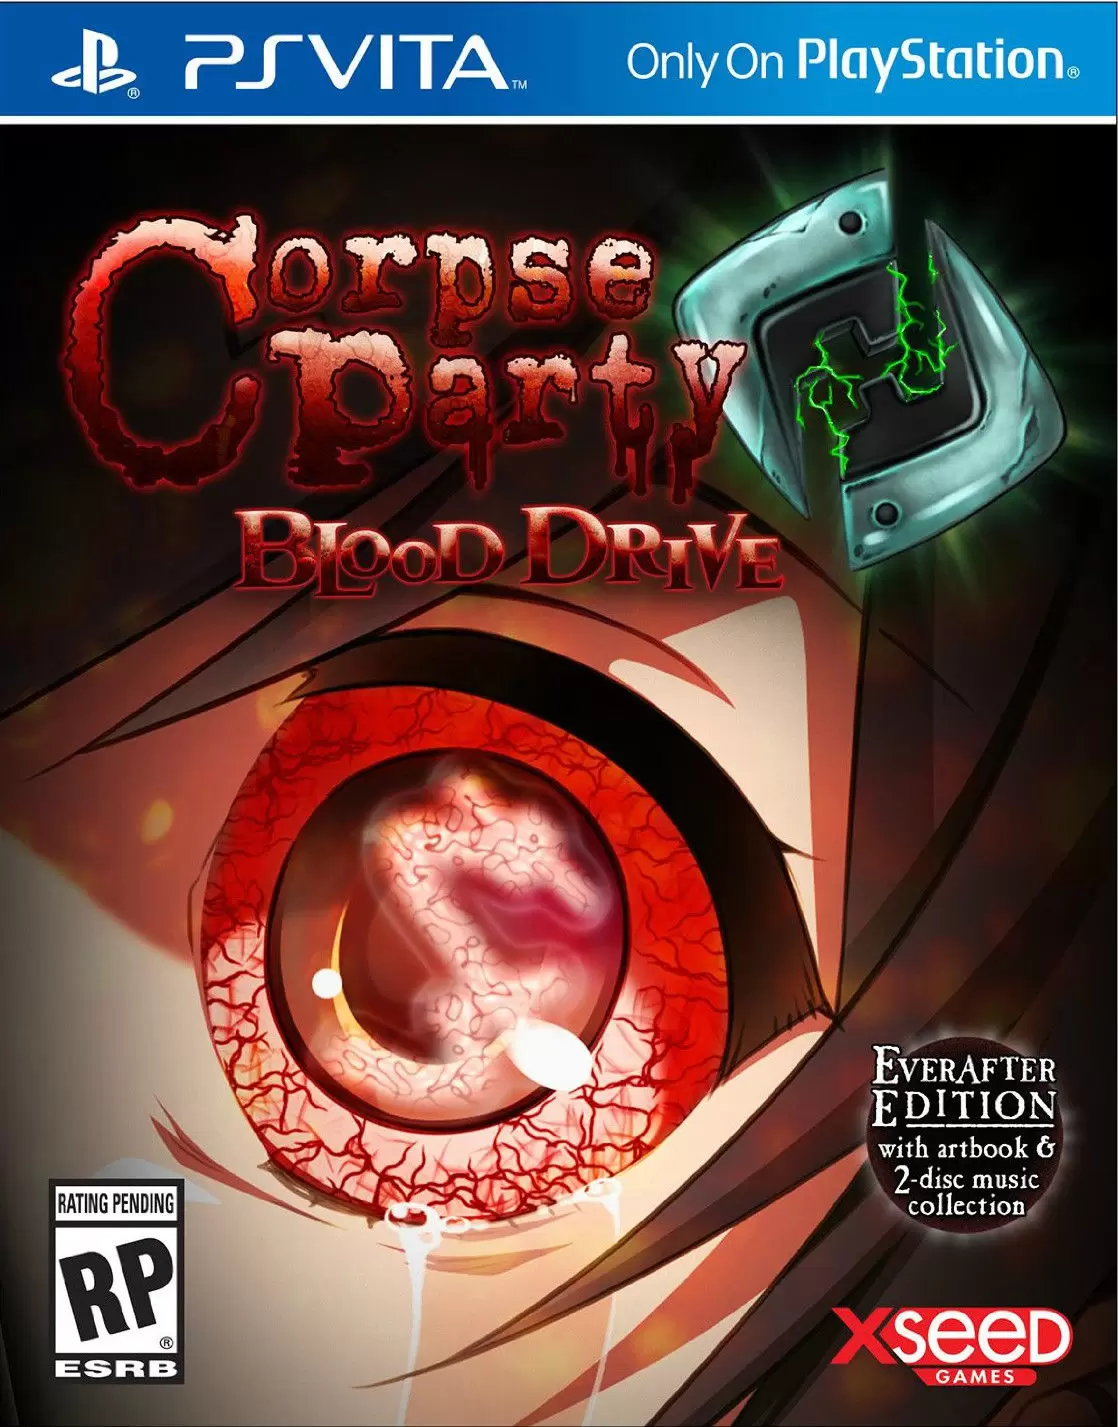 PS Vita Games - Corpse Party Ever After Edition